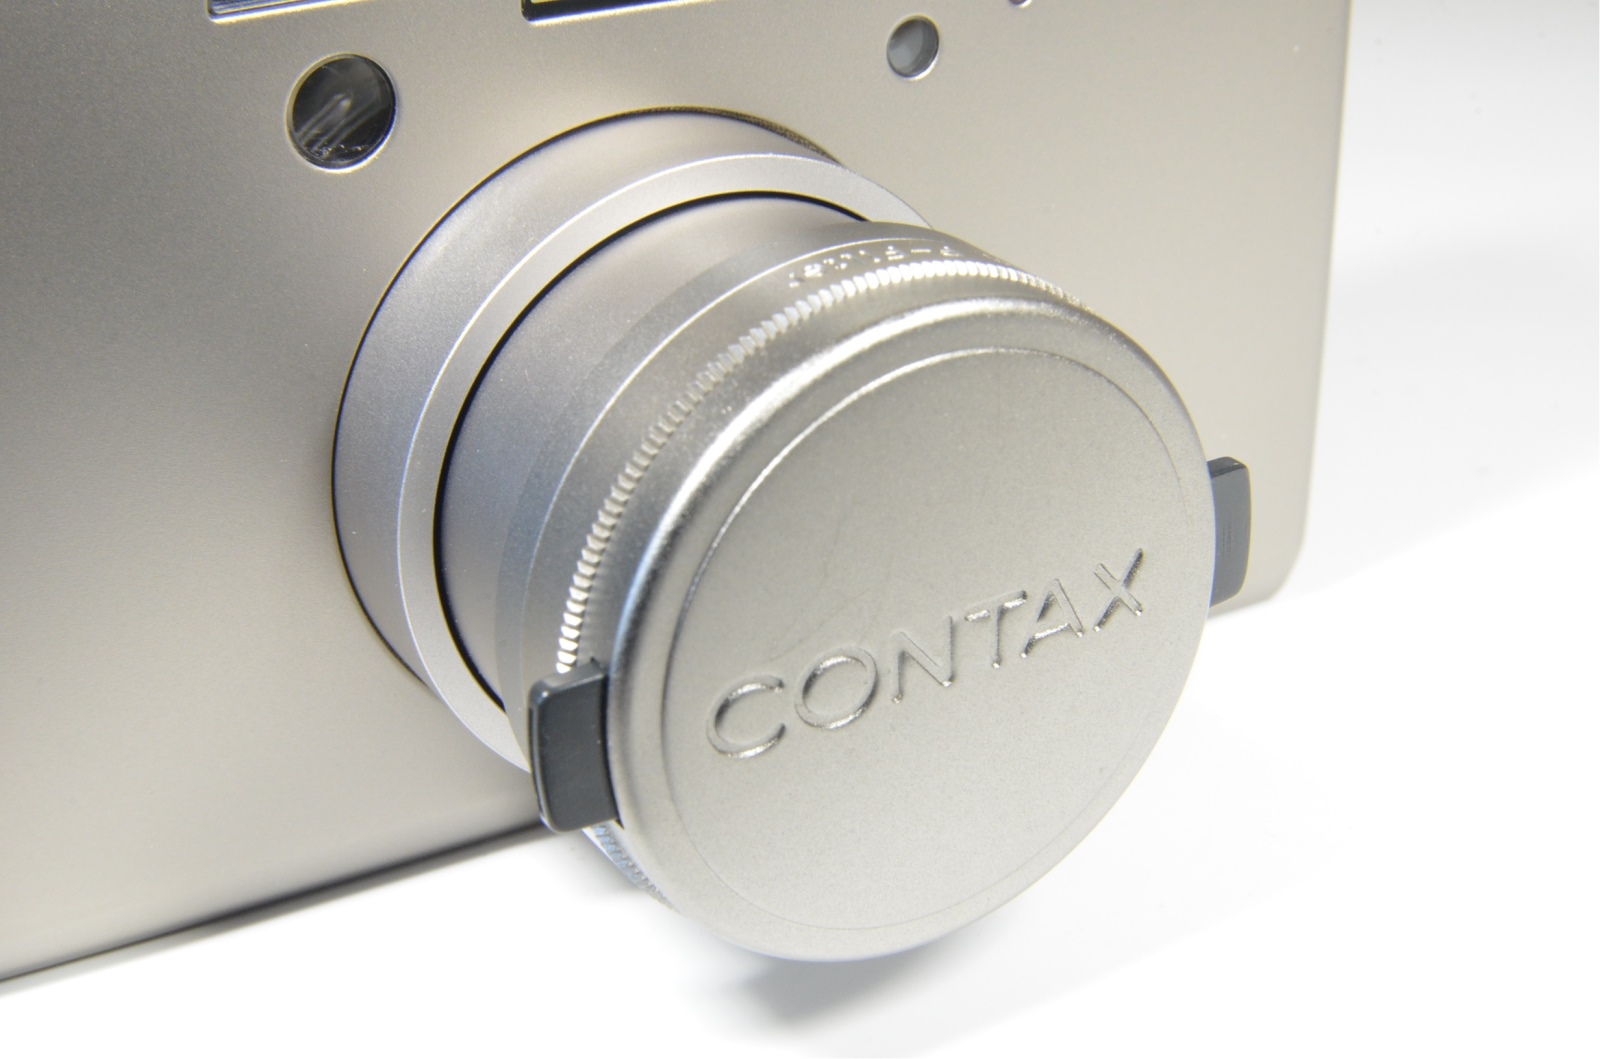 contax t3 double teeth with data back, 30.5 adapter and lens filter film tested